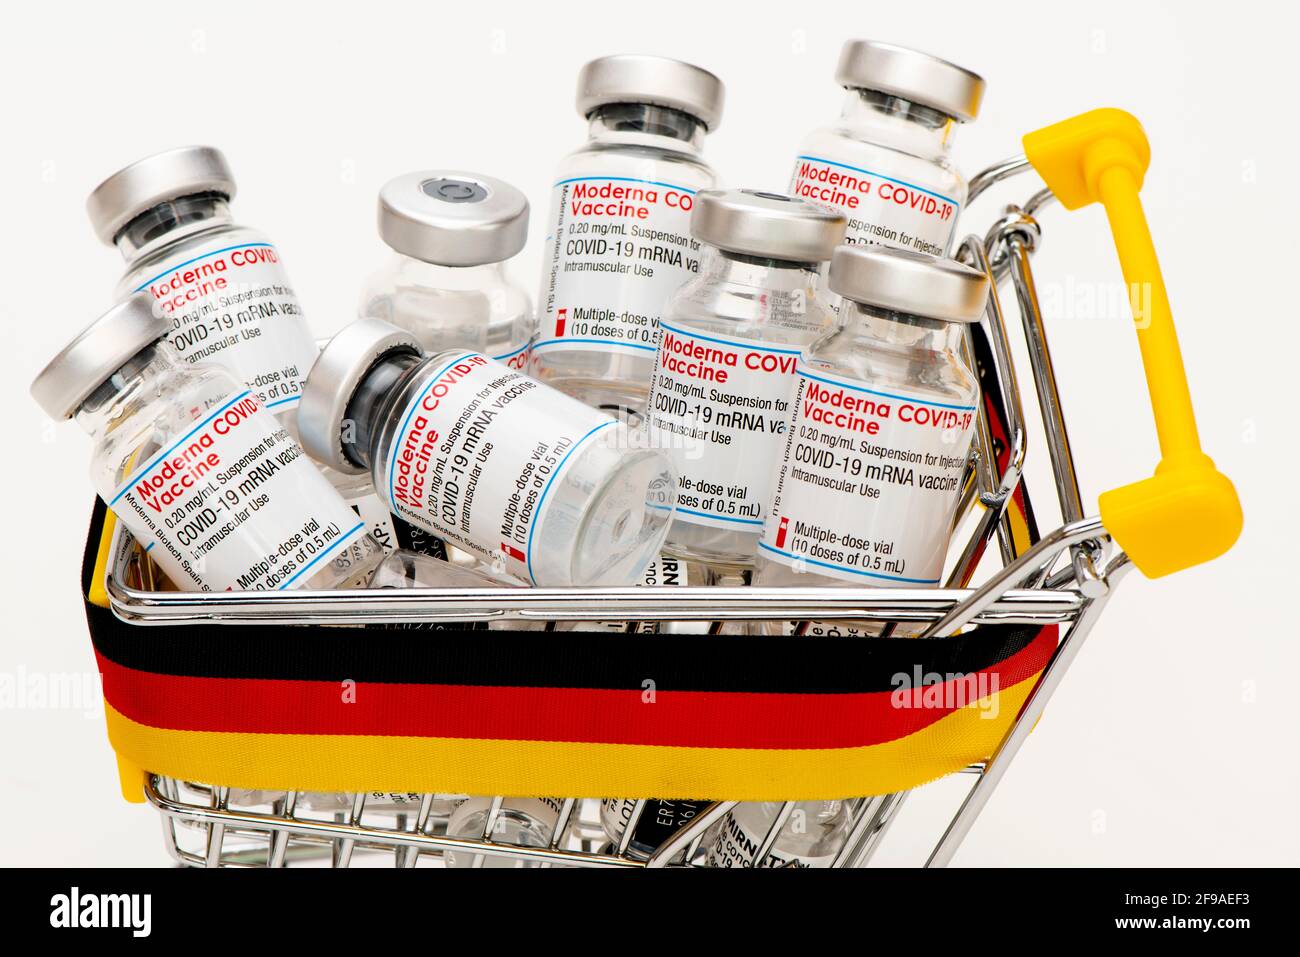 Original COVID-19 vaccination ampoule from Moderna and Pfizer-BioNTech symbolically in a shopping trolley with a German-colored banderole Stock Photo